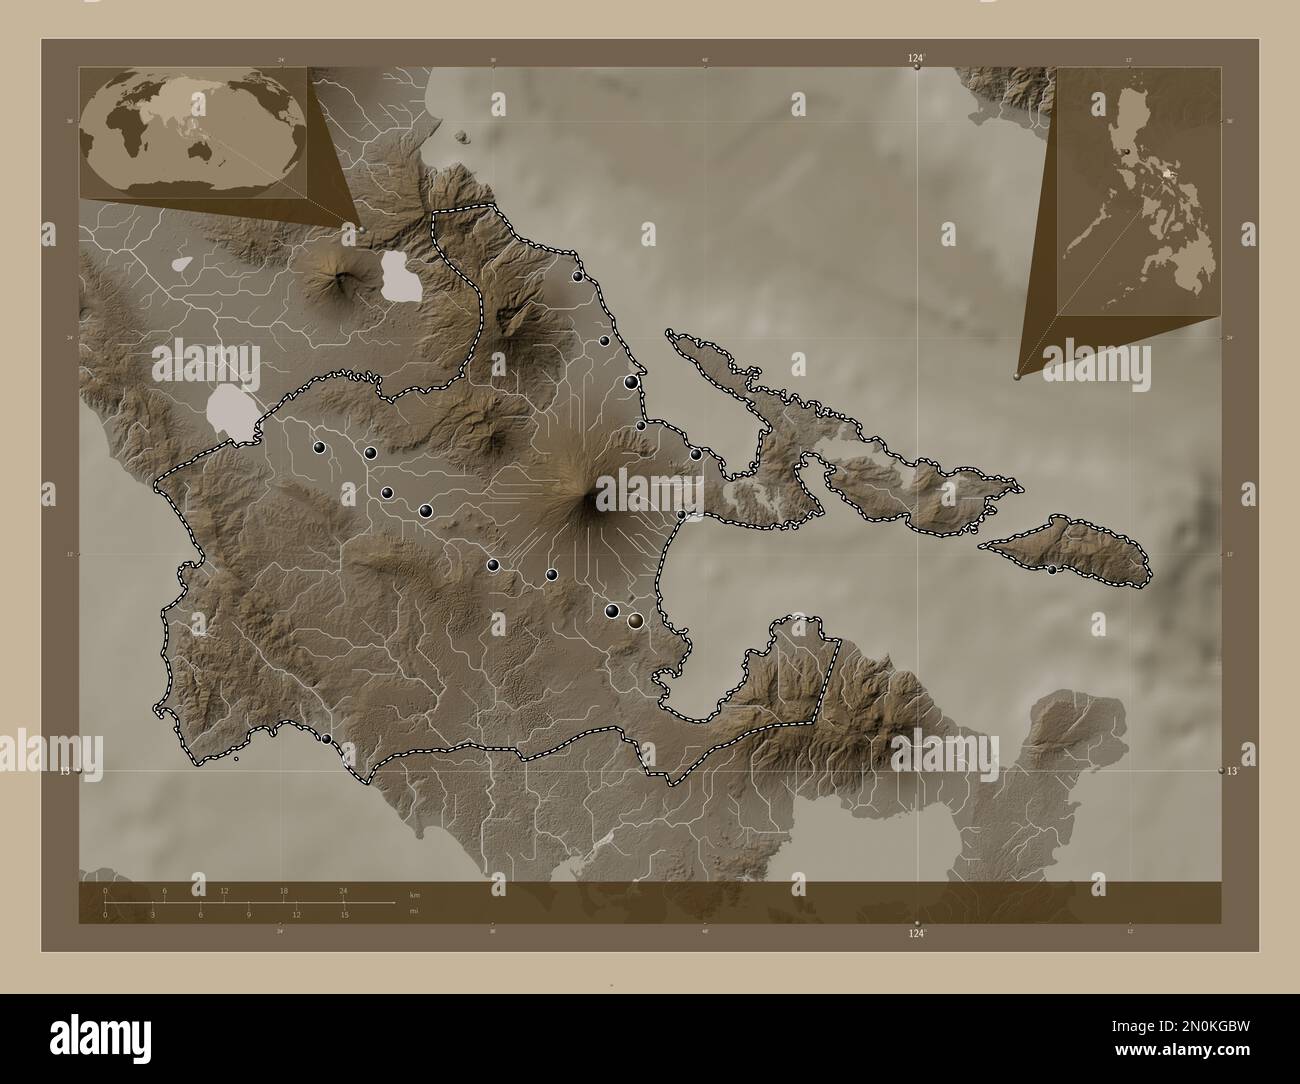 Albay, province of Philippines. Elevation map colored in sepia tones with lakes and rivers. Locations of major cities of the region. Corner auxiliary Stock Photo